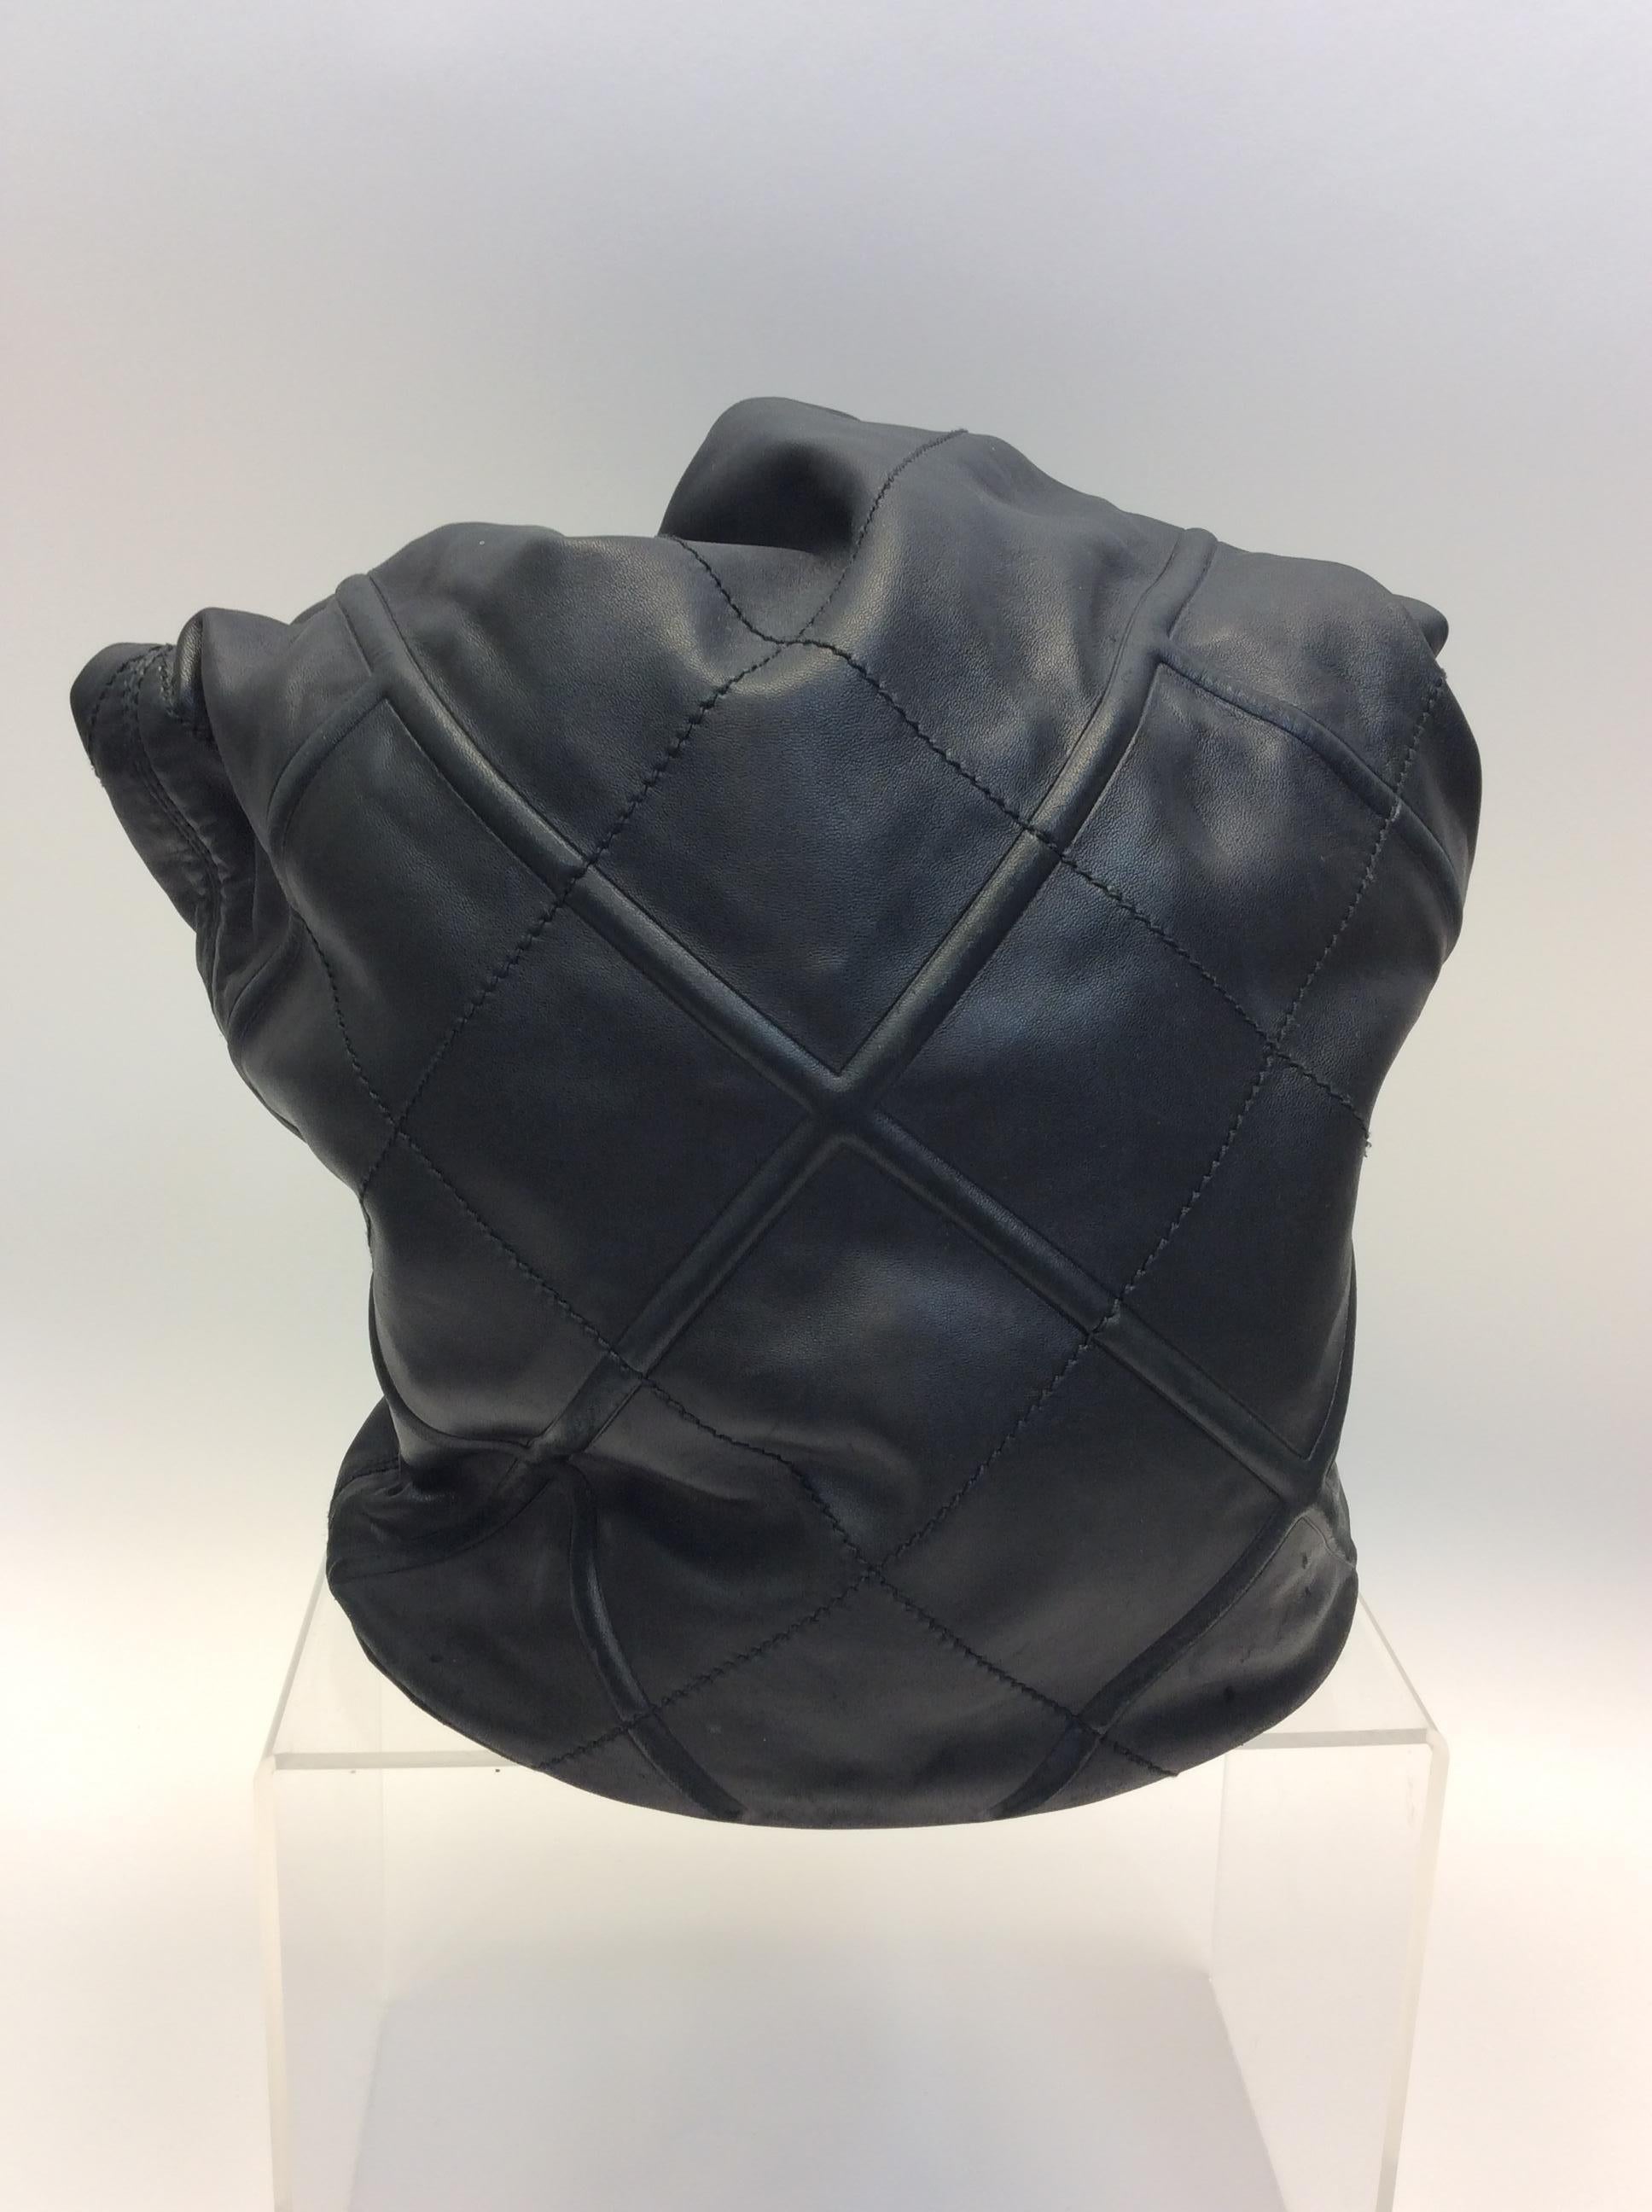 Salvatore Ferragamo Black Leather Bucket Bag In Excellent Condition For Sale In Narberth, PA